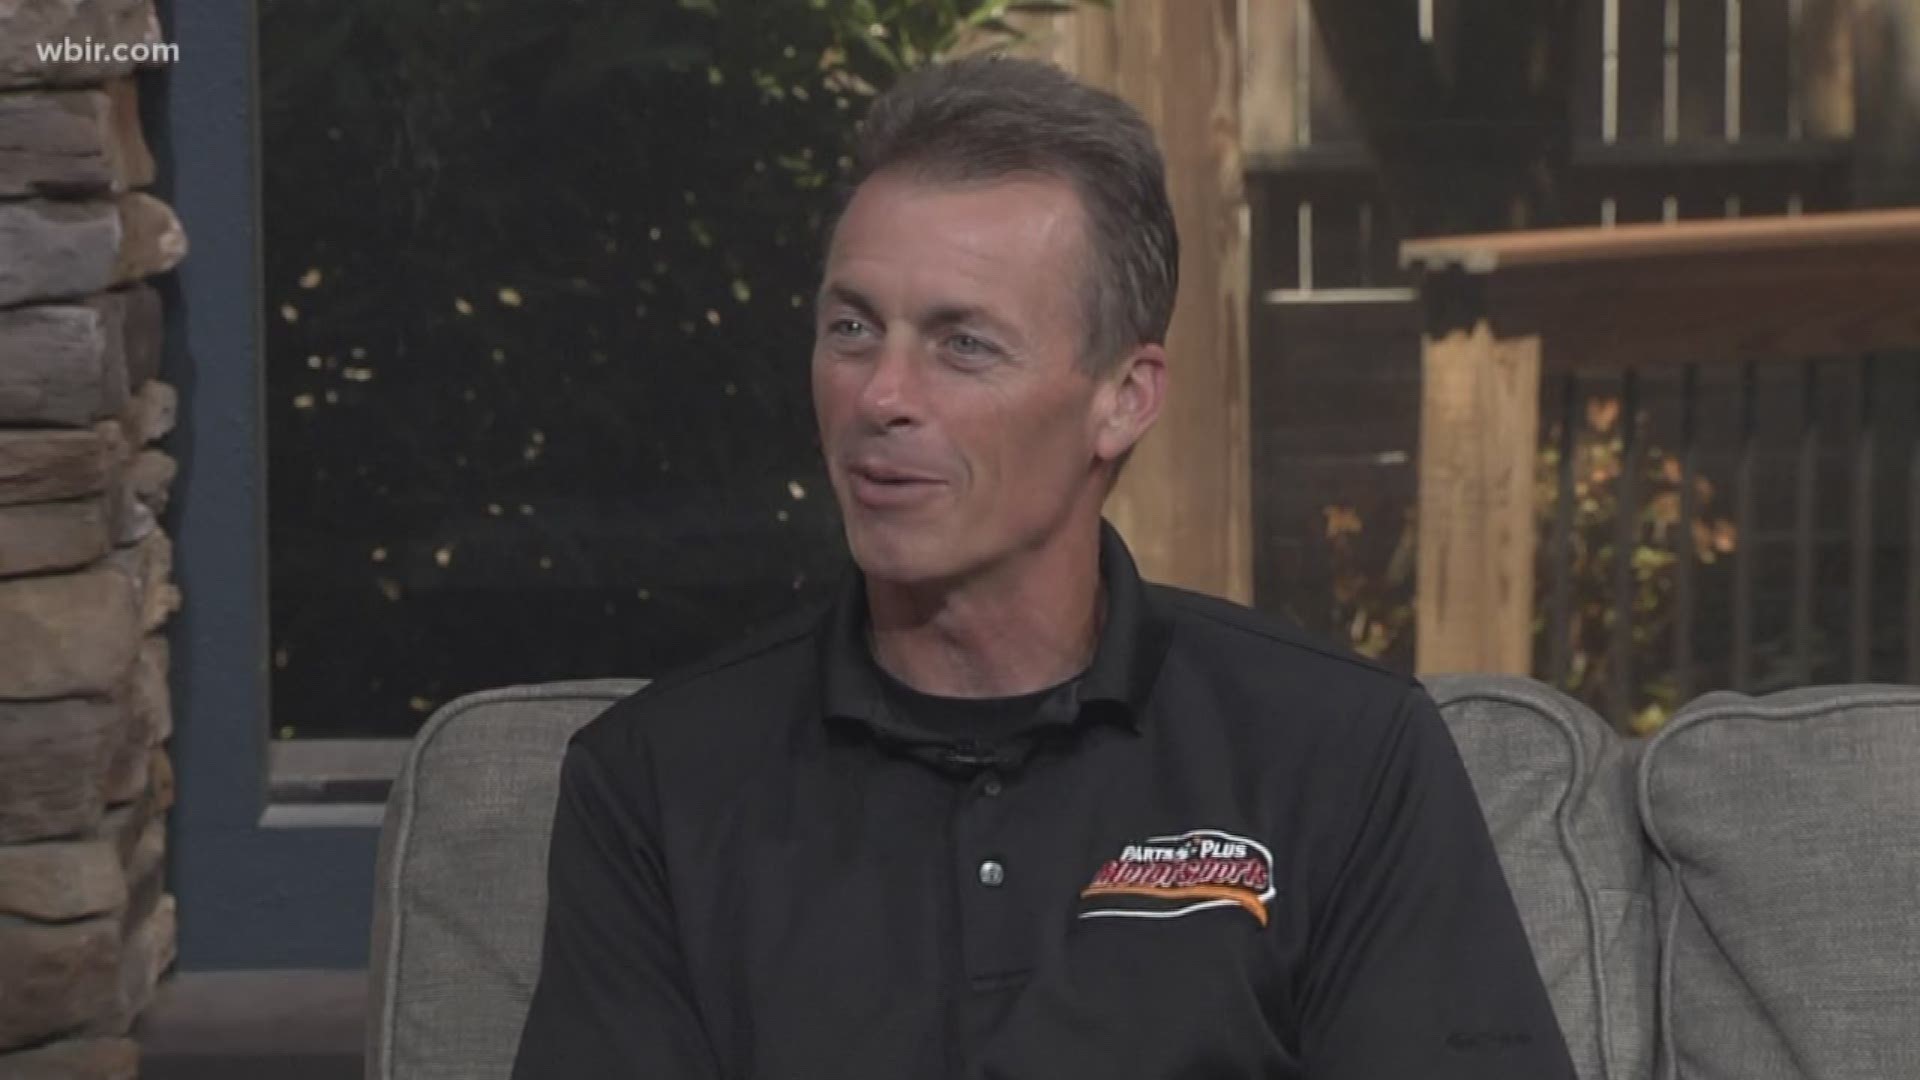 Tennessee's own Clay Millican joins us in the studio to talk about the NHRA race in Bristol this weekend.